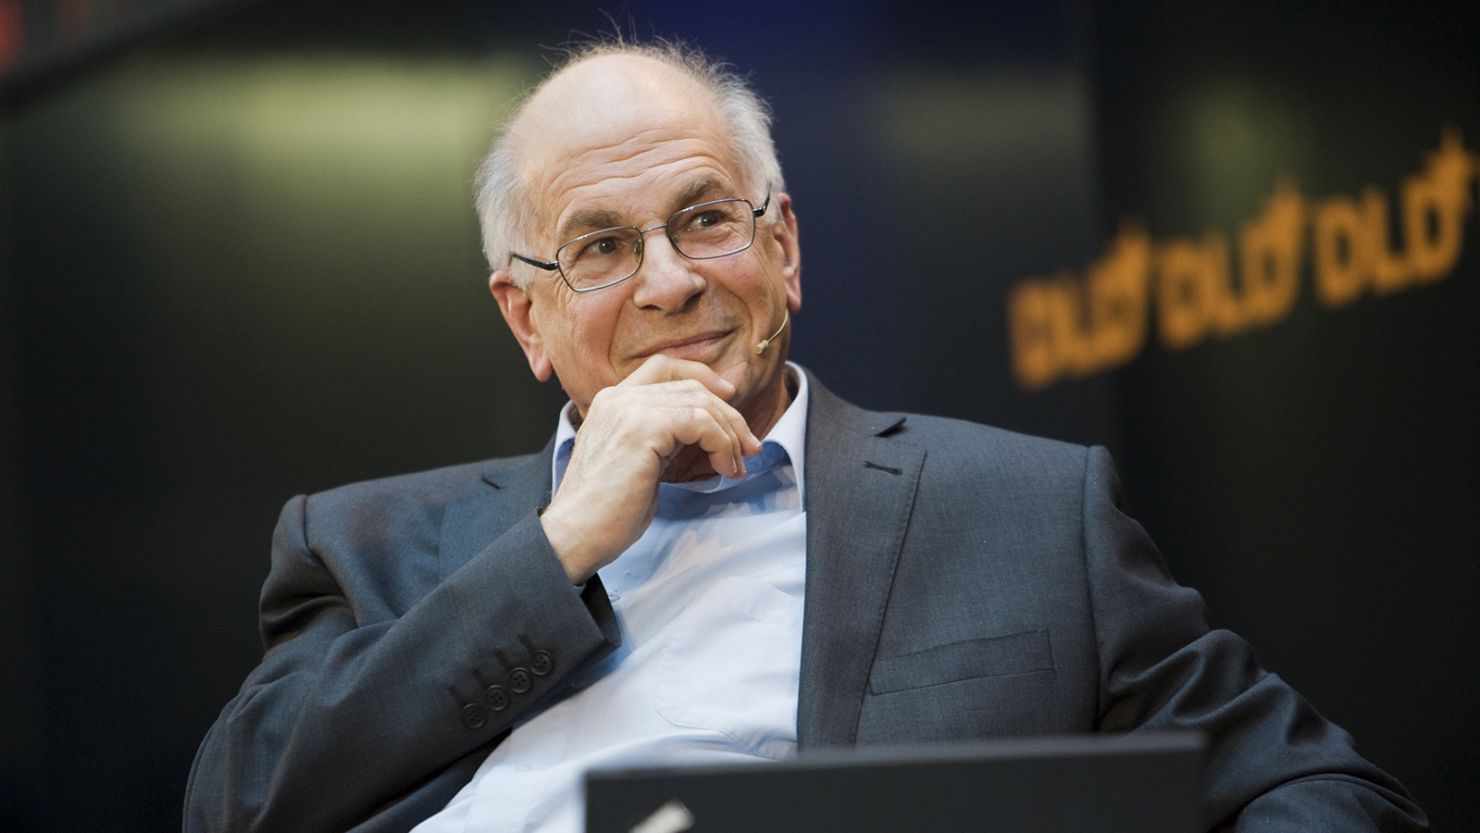 Portrait of Daniel Kahneman, Israeli-American psychologist and 2002 Nobel Prize winner in economics, at the DLD Conference 2009 in Munich on January 27, 2009.